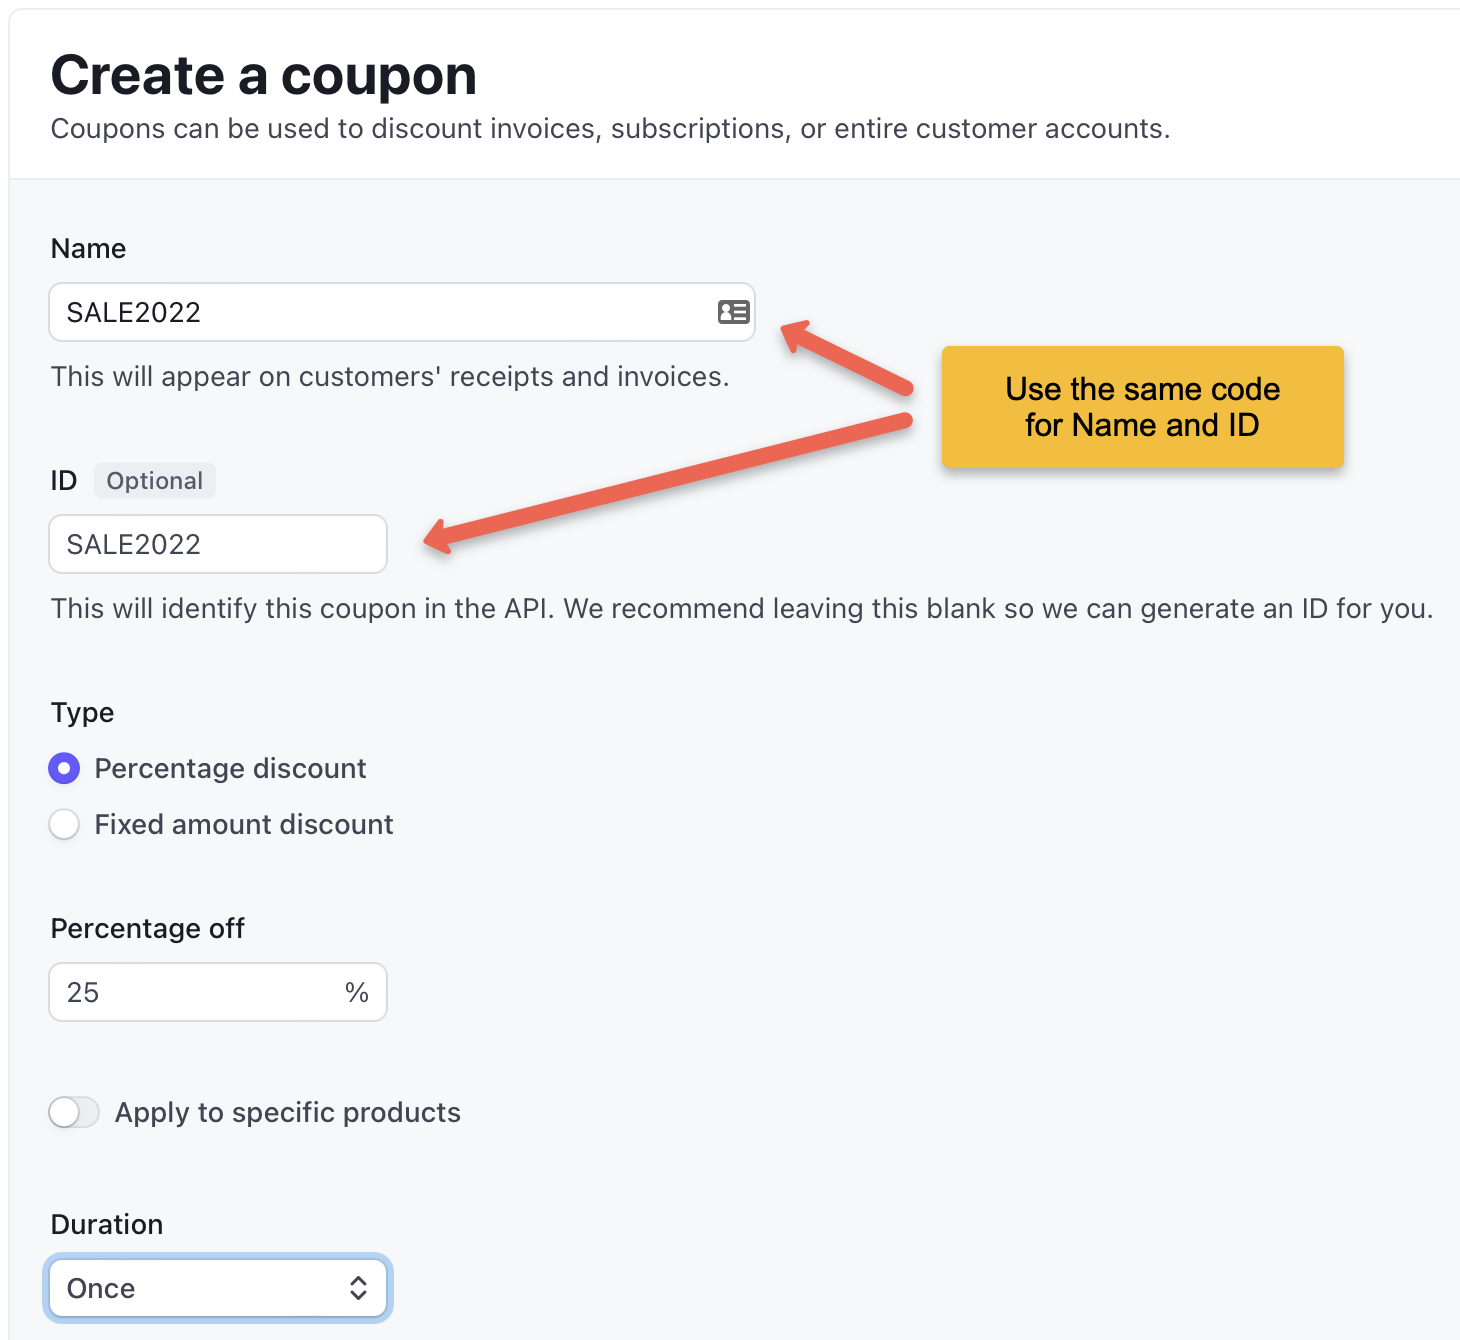 You can enter the parameters of your Stripe coupons in the 'Create a coupon' dialog.